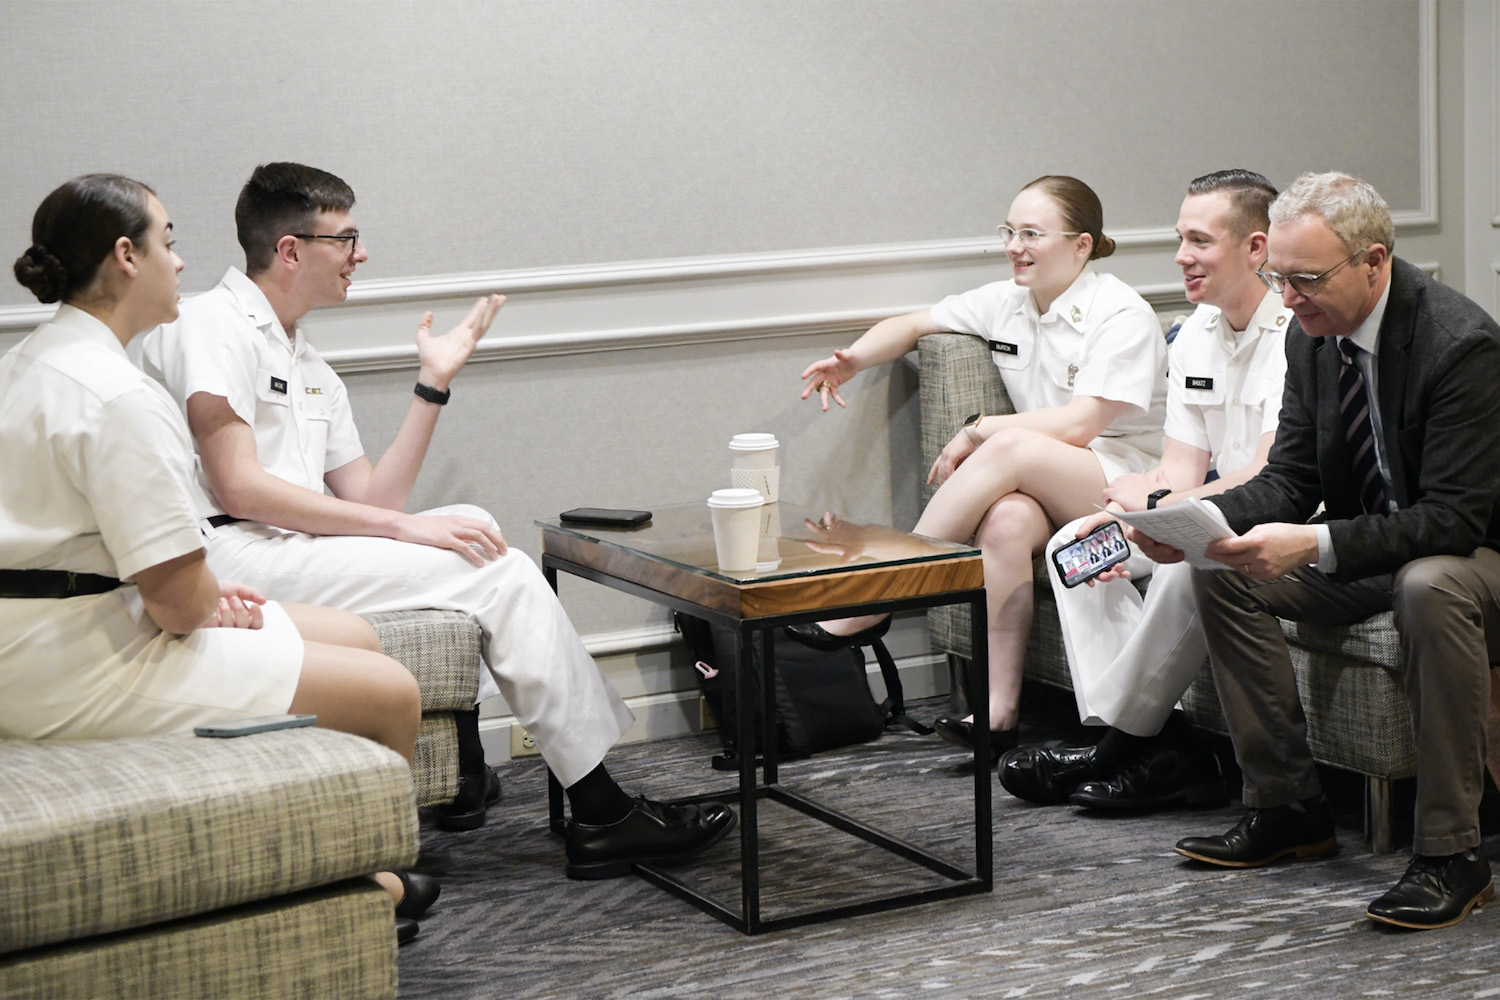 Students before an ethics competition at VMI, a military college in Virginia